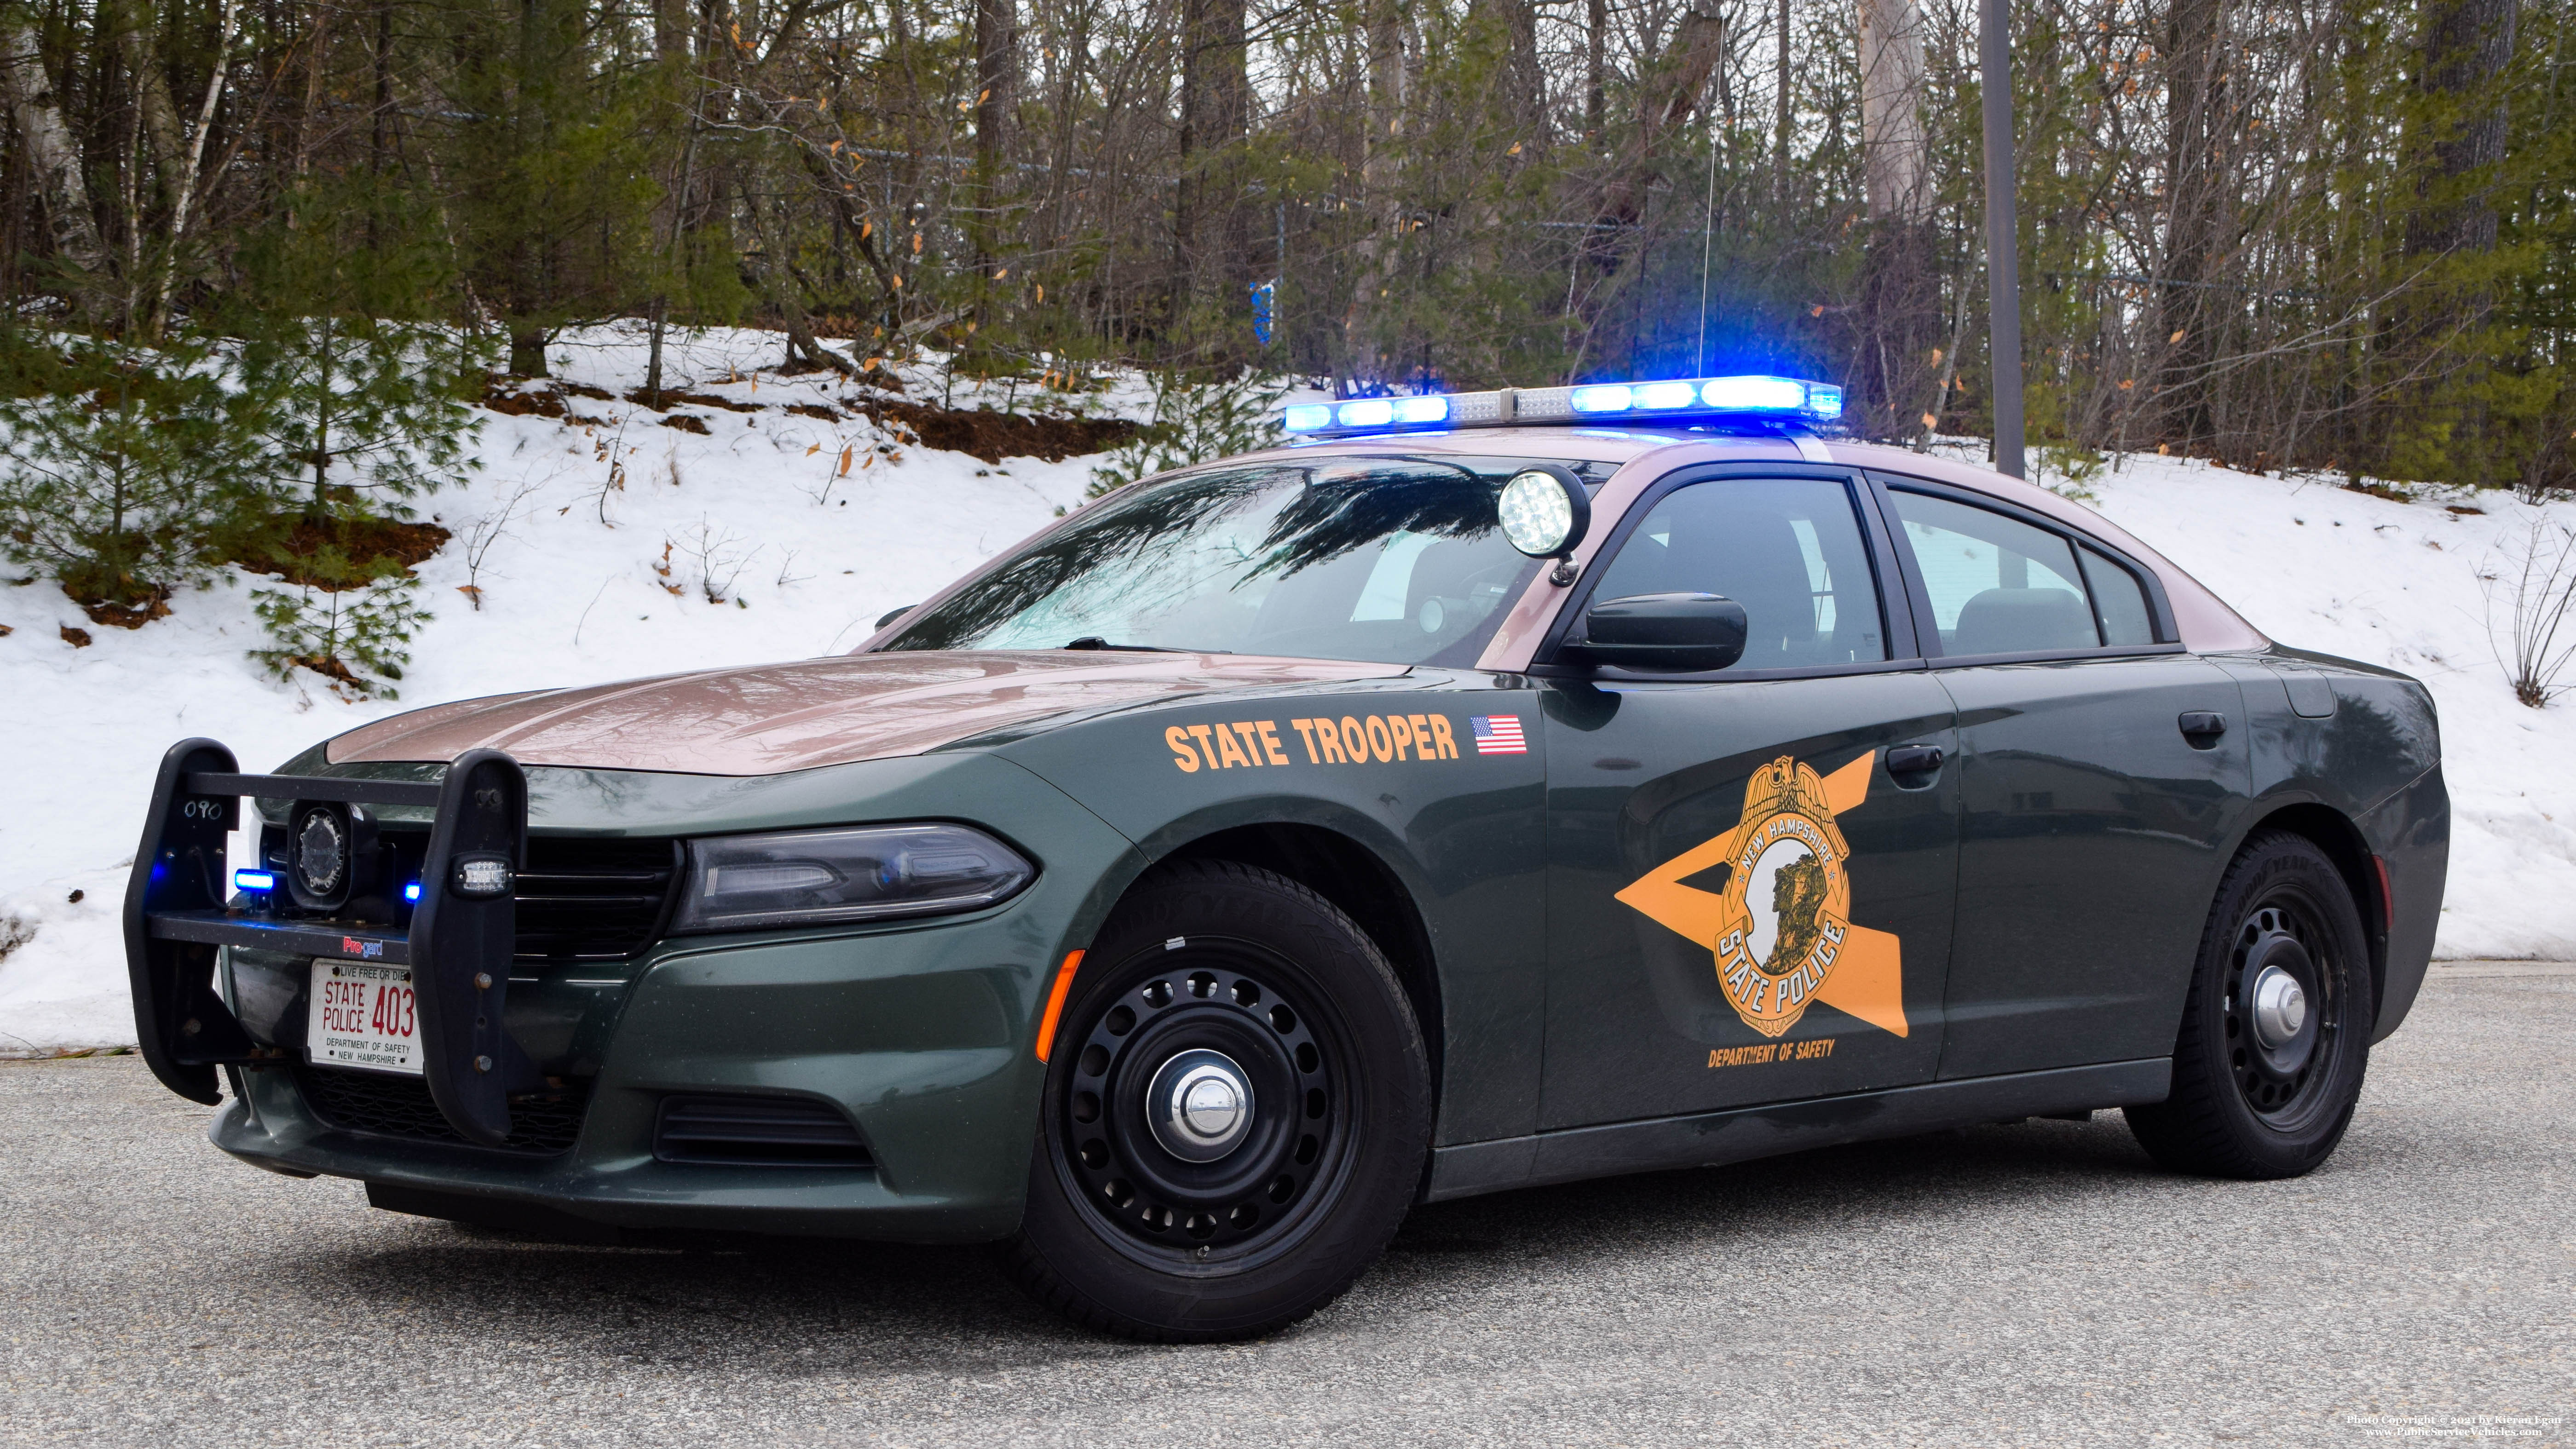 A photo  of New Hampshire State Police
            Cruiser 403, a 2015-2019 Dodge Charger             taken by Kieran Egan